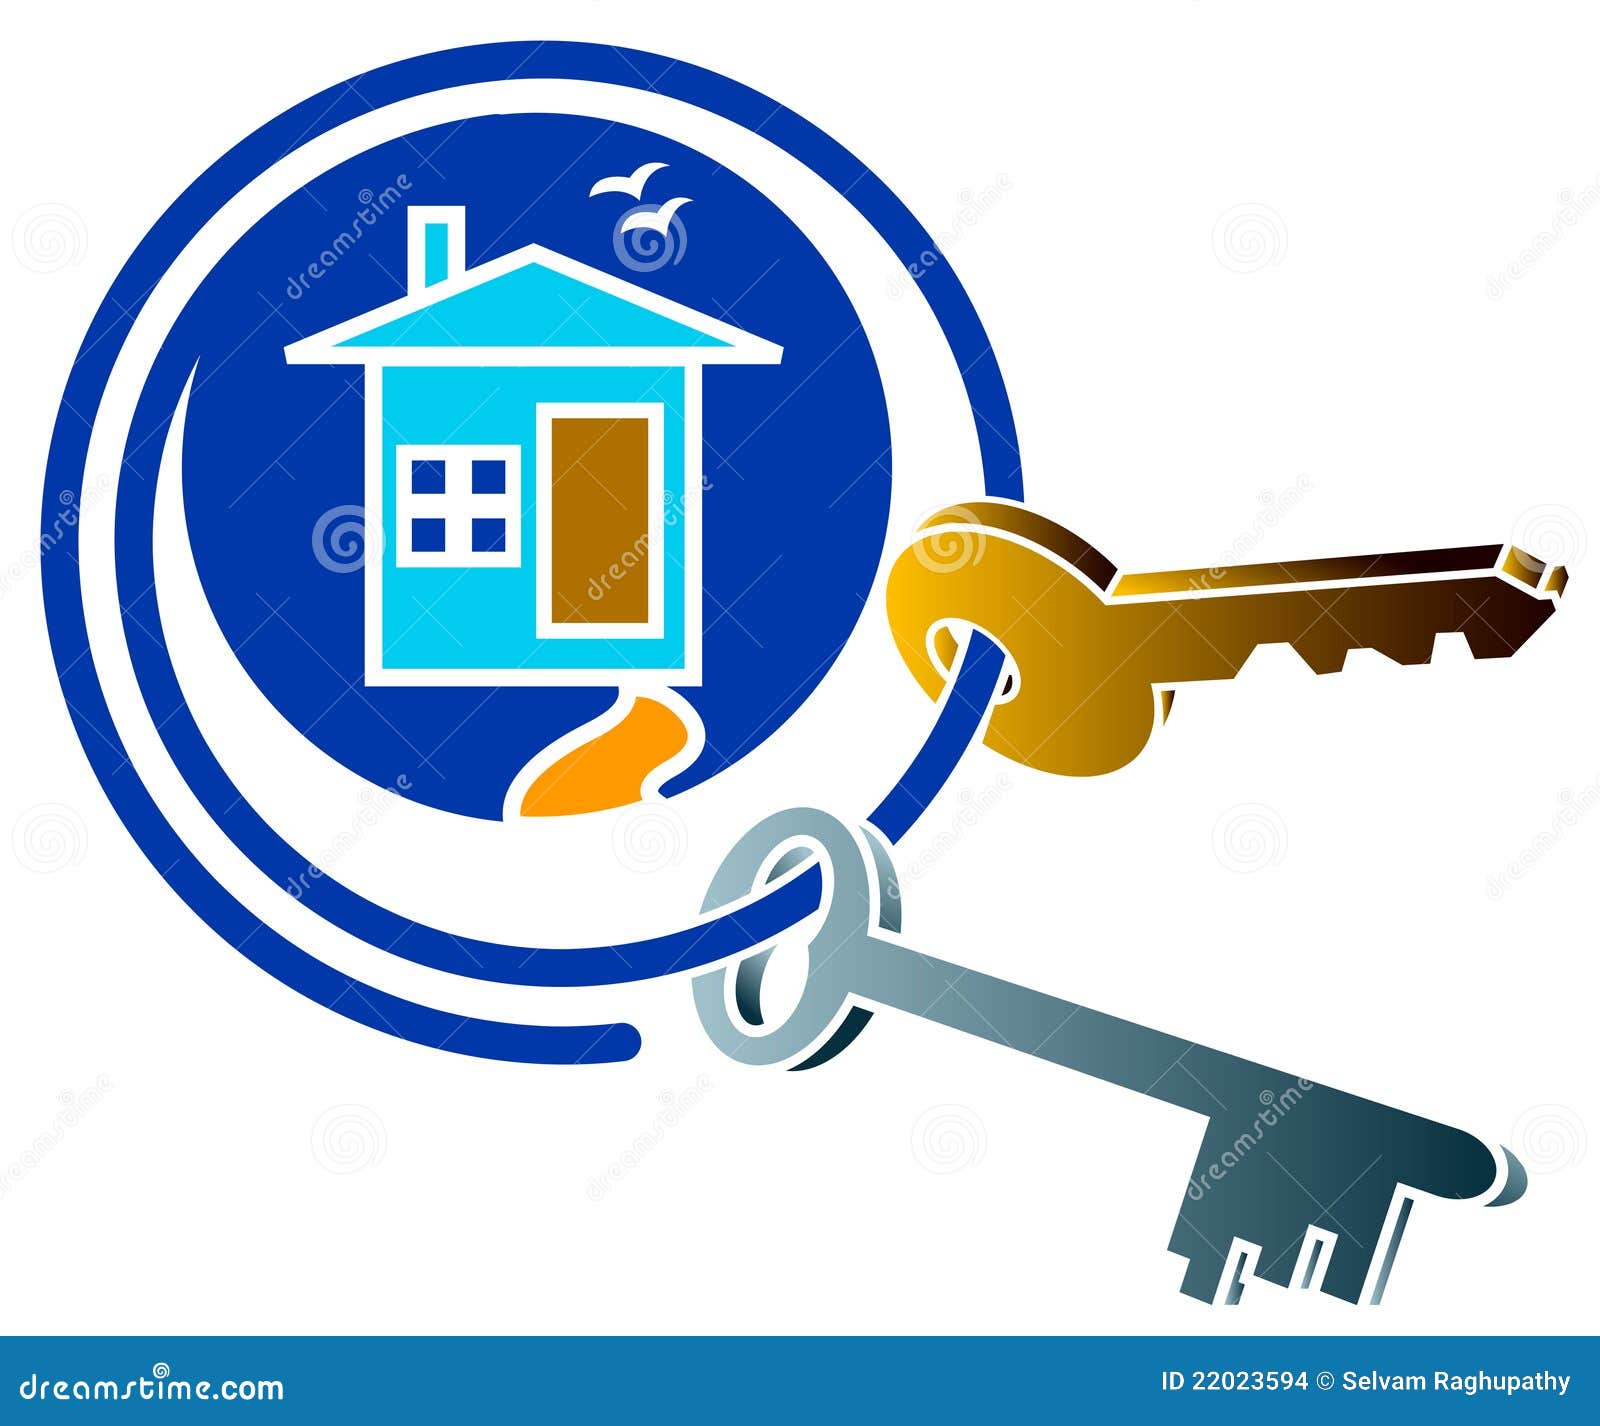 House and key logo stock vector. Illustration of building ...